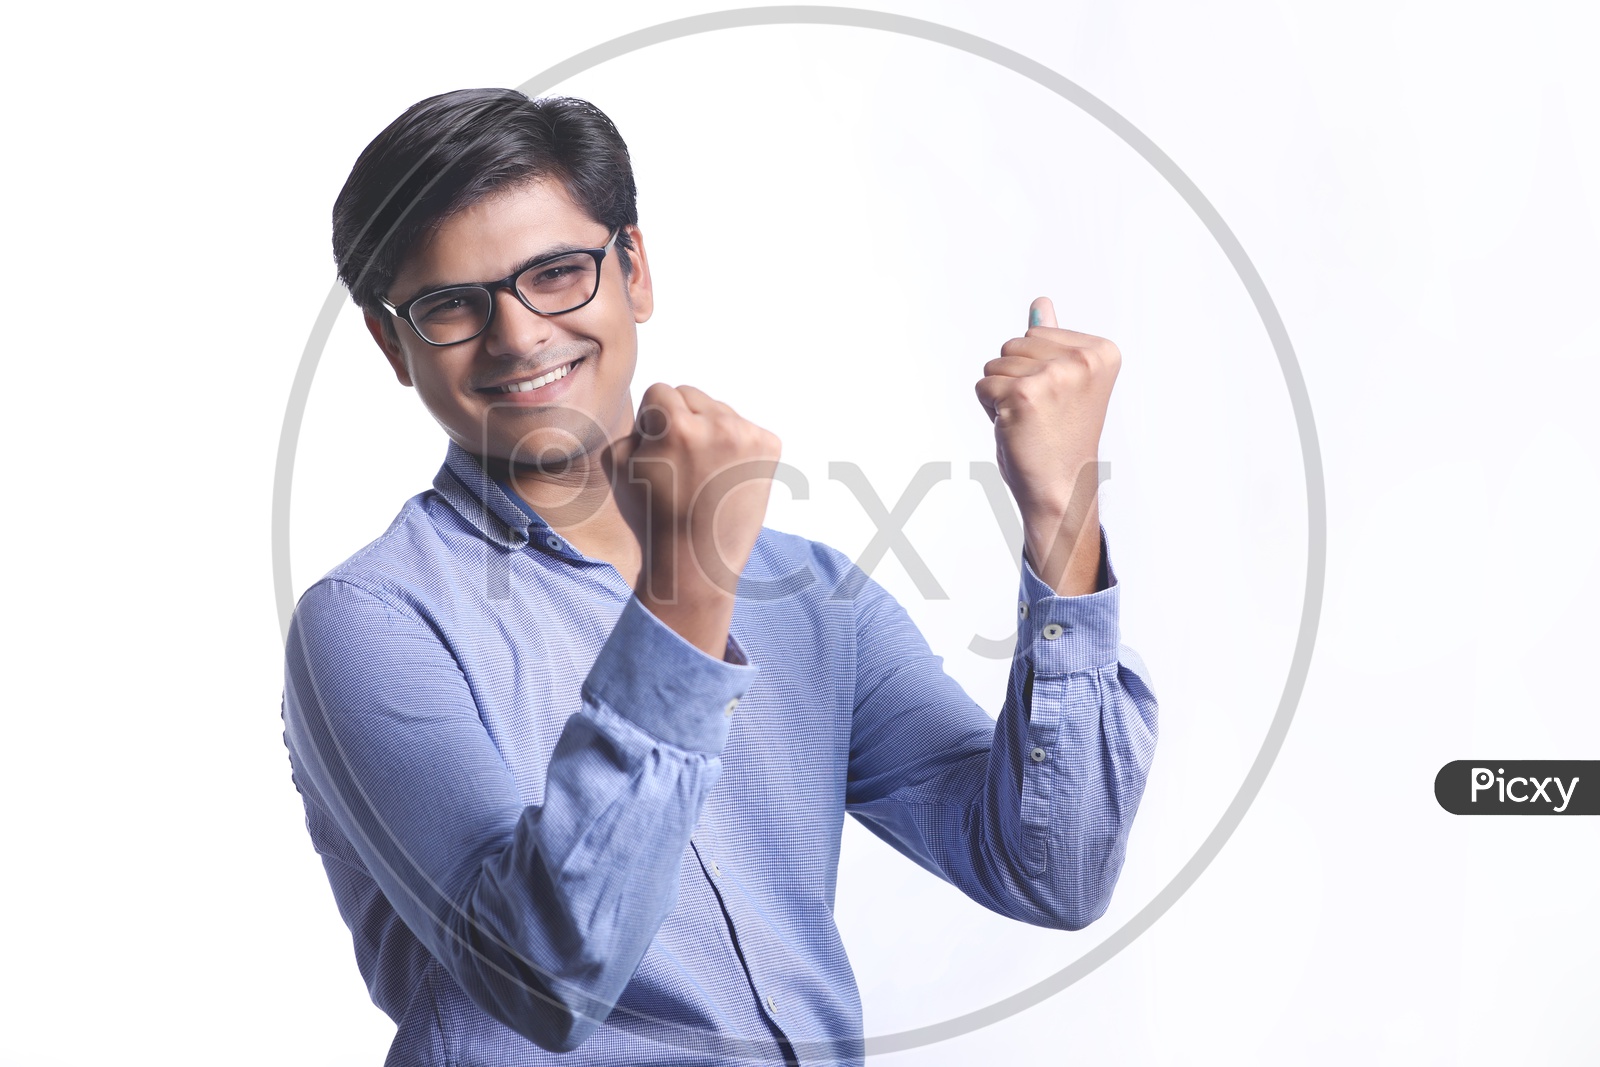 Young Indian College Student, Indian Male Model on White Background